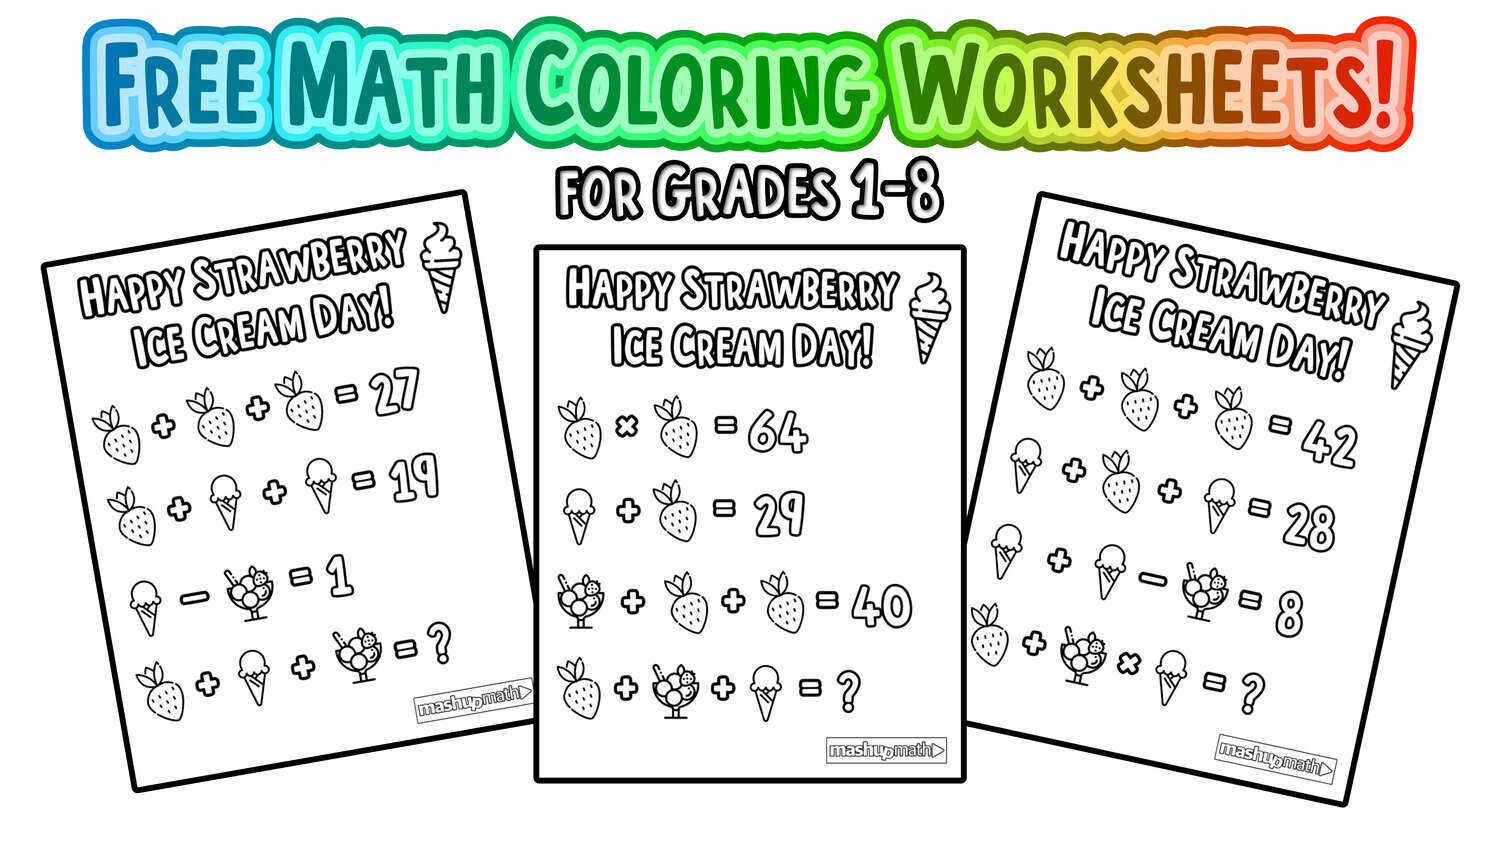 Free Printable Math Coloring by Number - Dinosaur